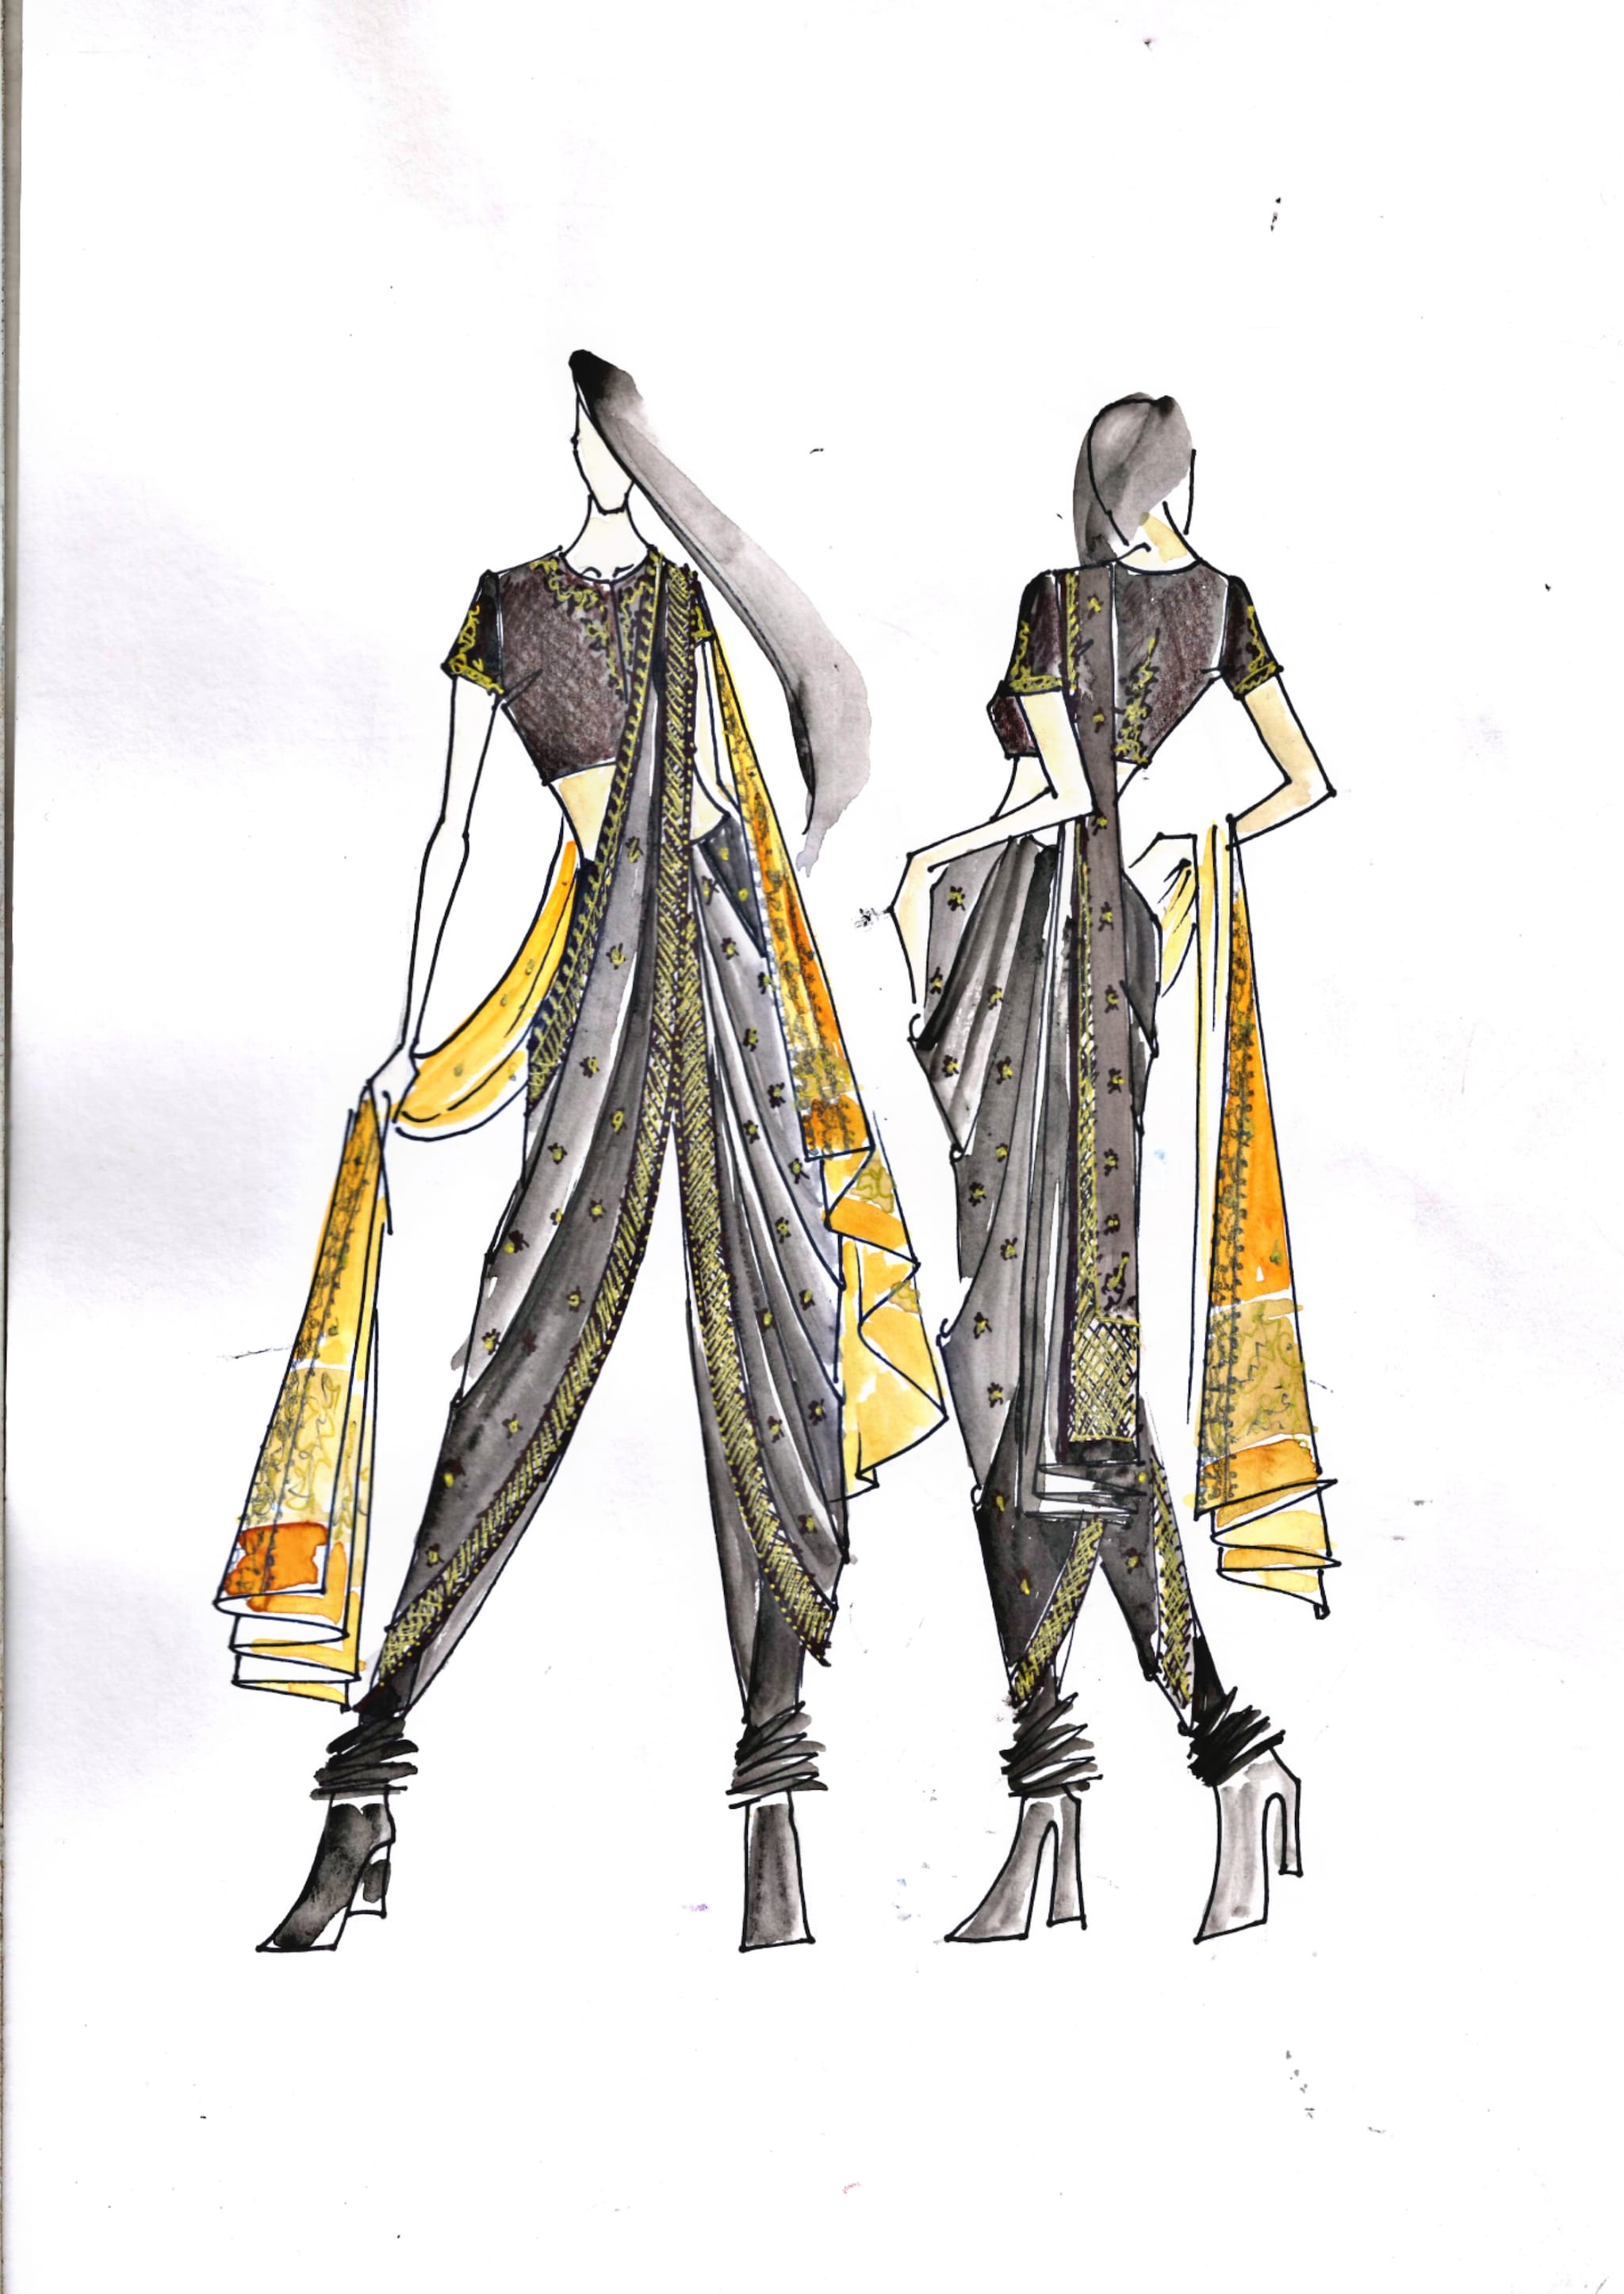 FASHION AND CULTURE THE EVOLUTION OF EASTERN AND WESTERN STYLES  by  Mallika singhal  Medium